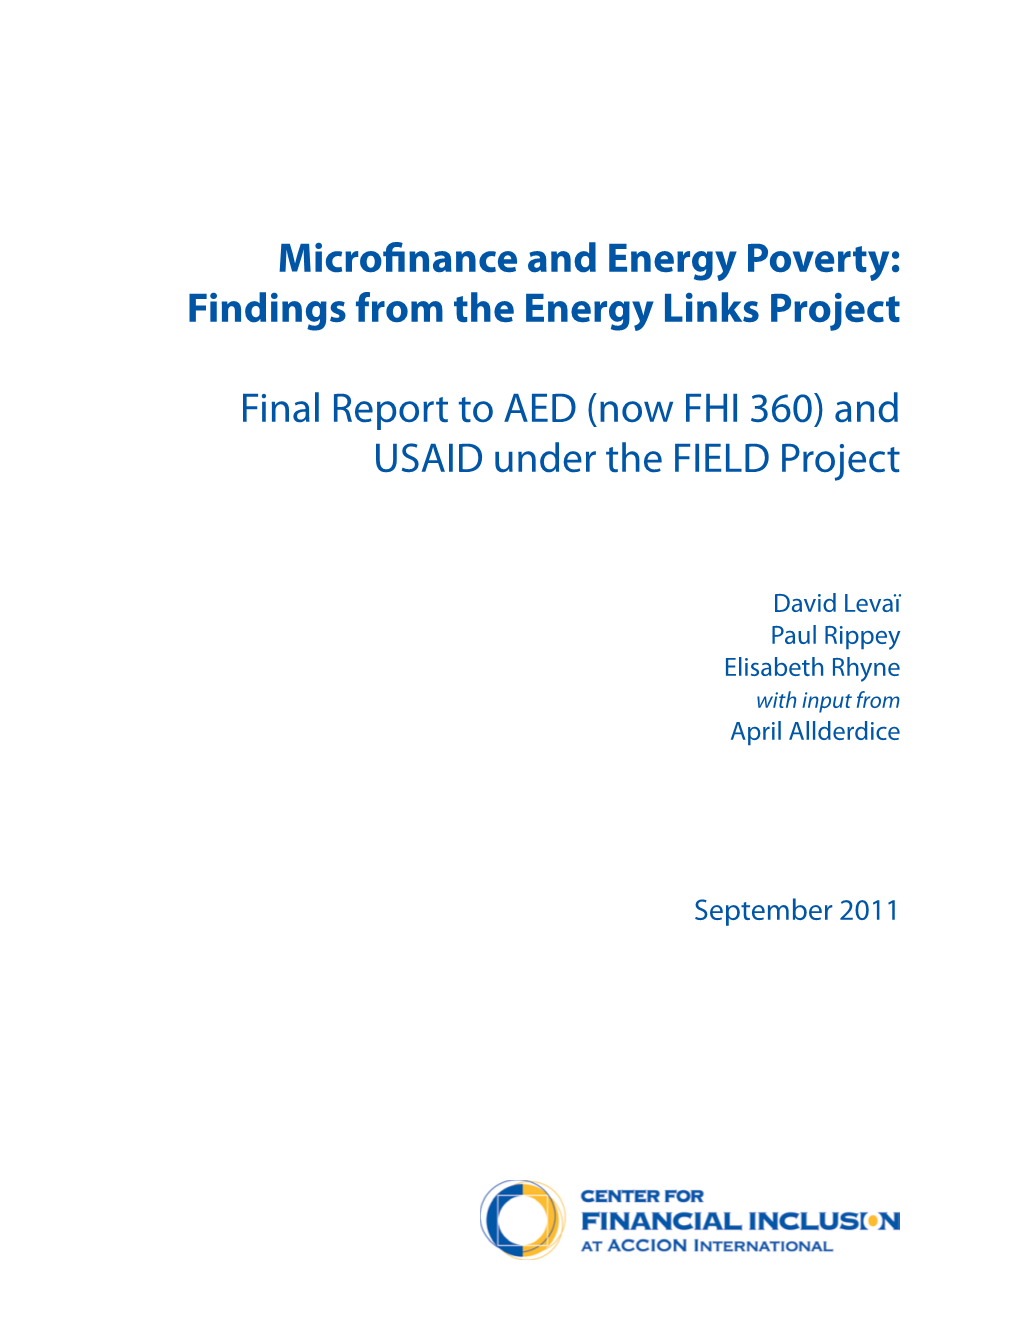 Findings from the Energy Links Project Final Report to AED (Now FHI 360)